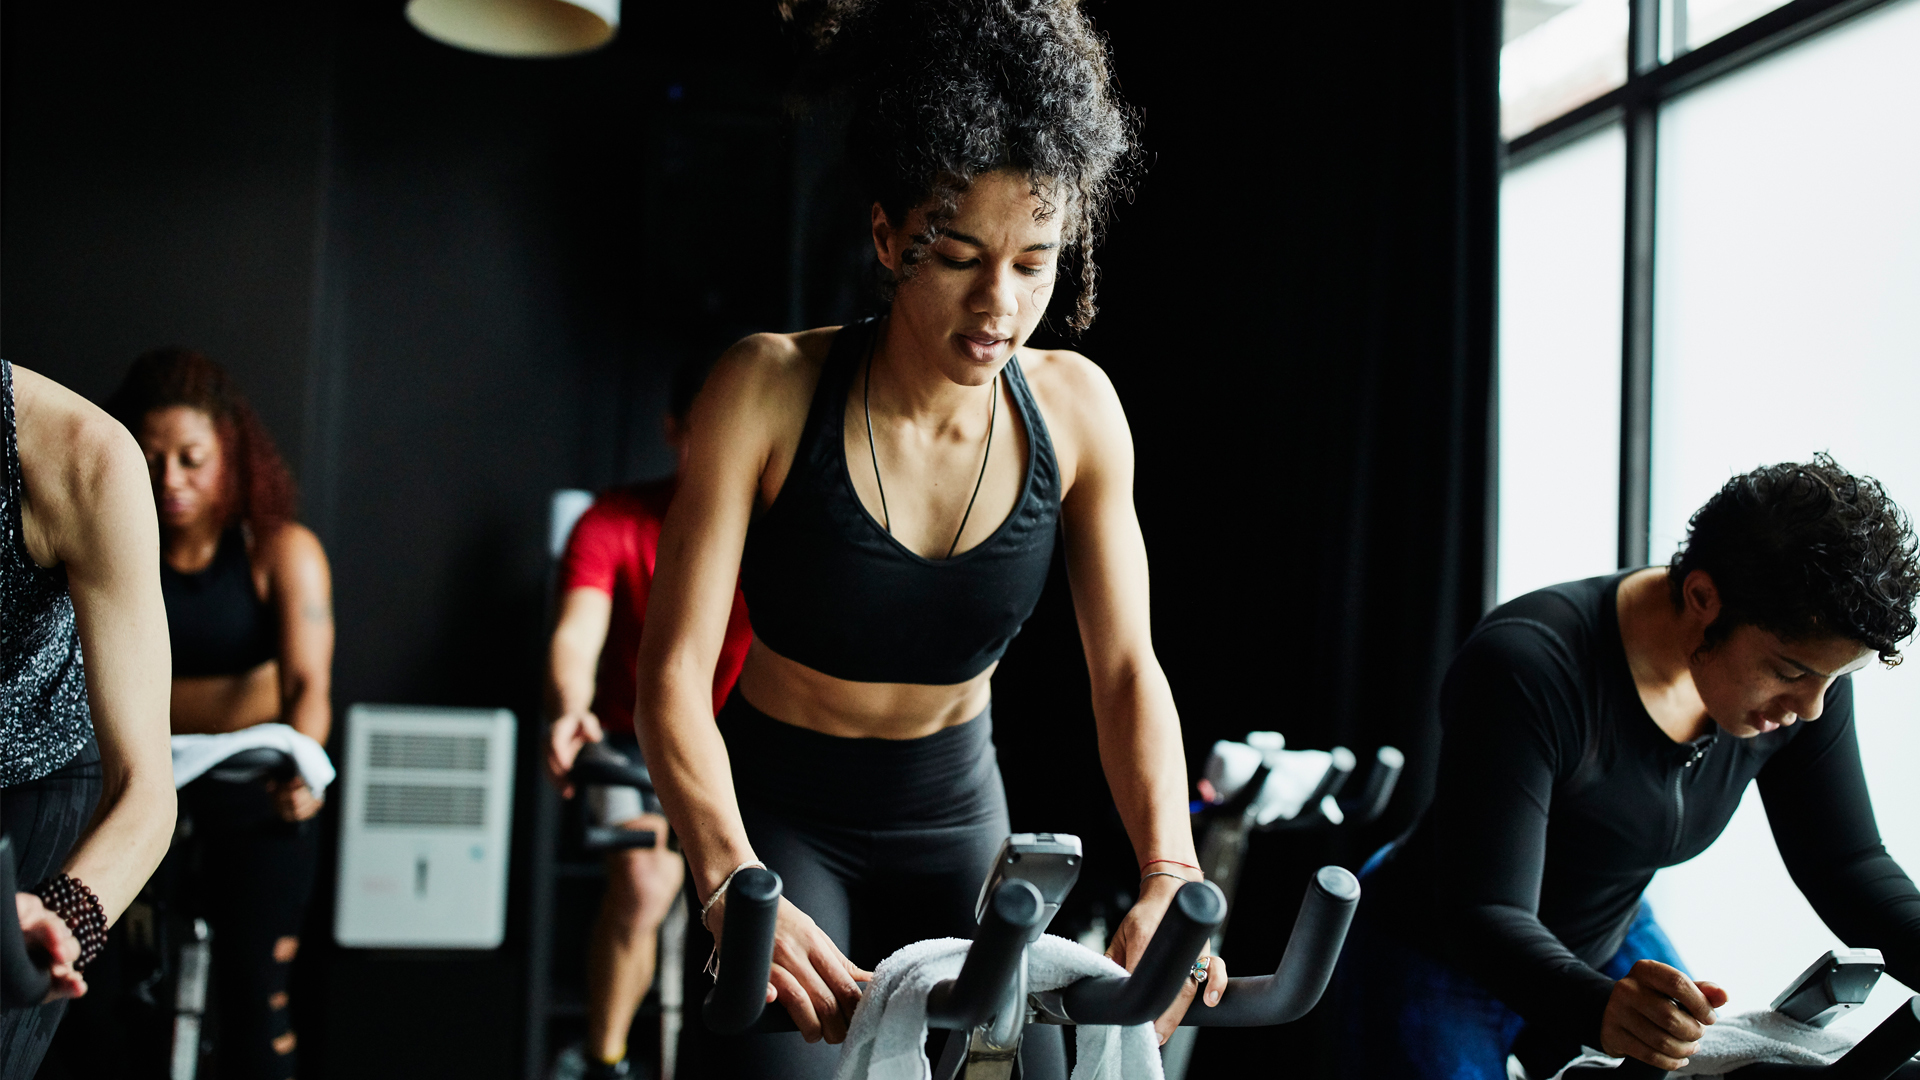 How often should you work out? Image of woman riding exercise bike in spin class gym